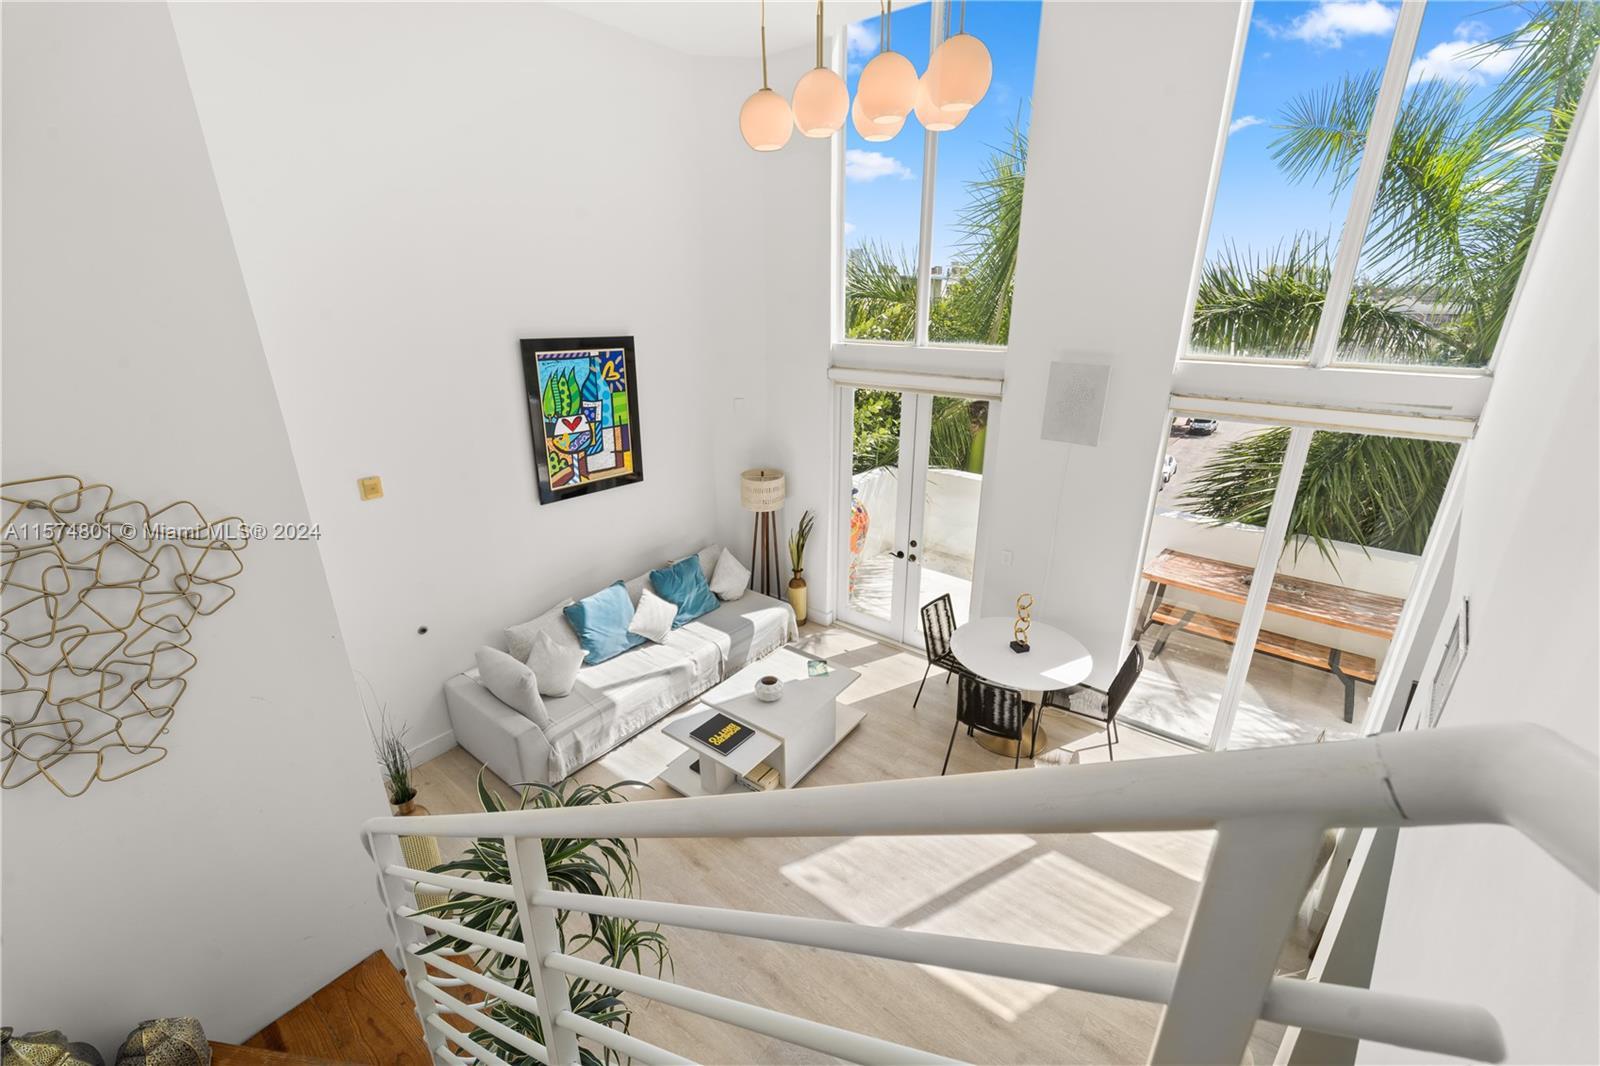 Experience contemporary luxury in a private Loft-style Condo nestled in the sought-after West Ave; A